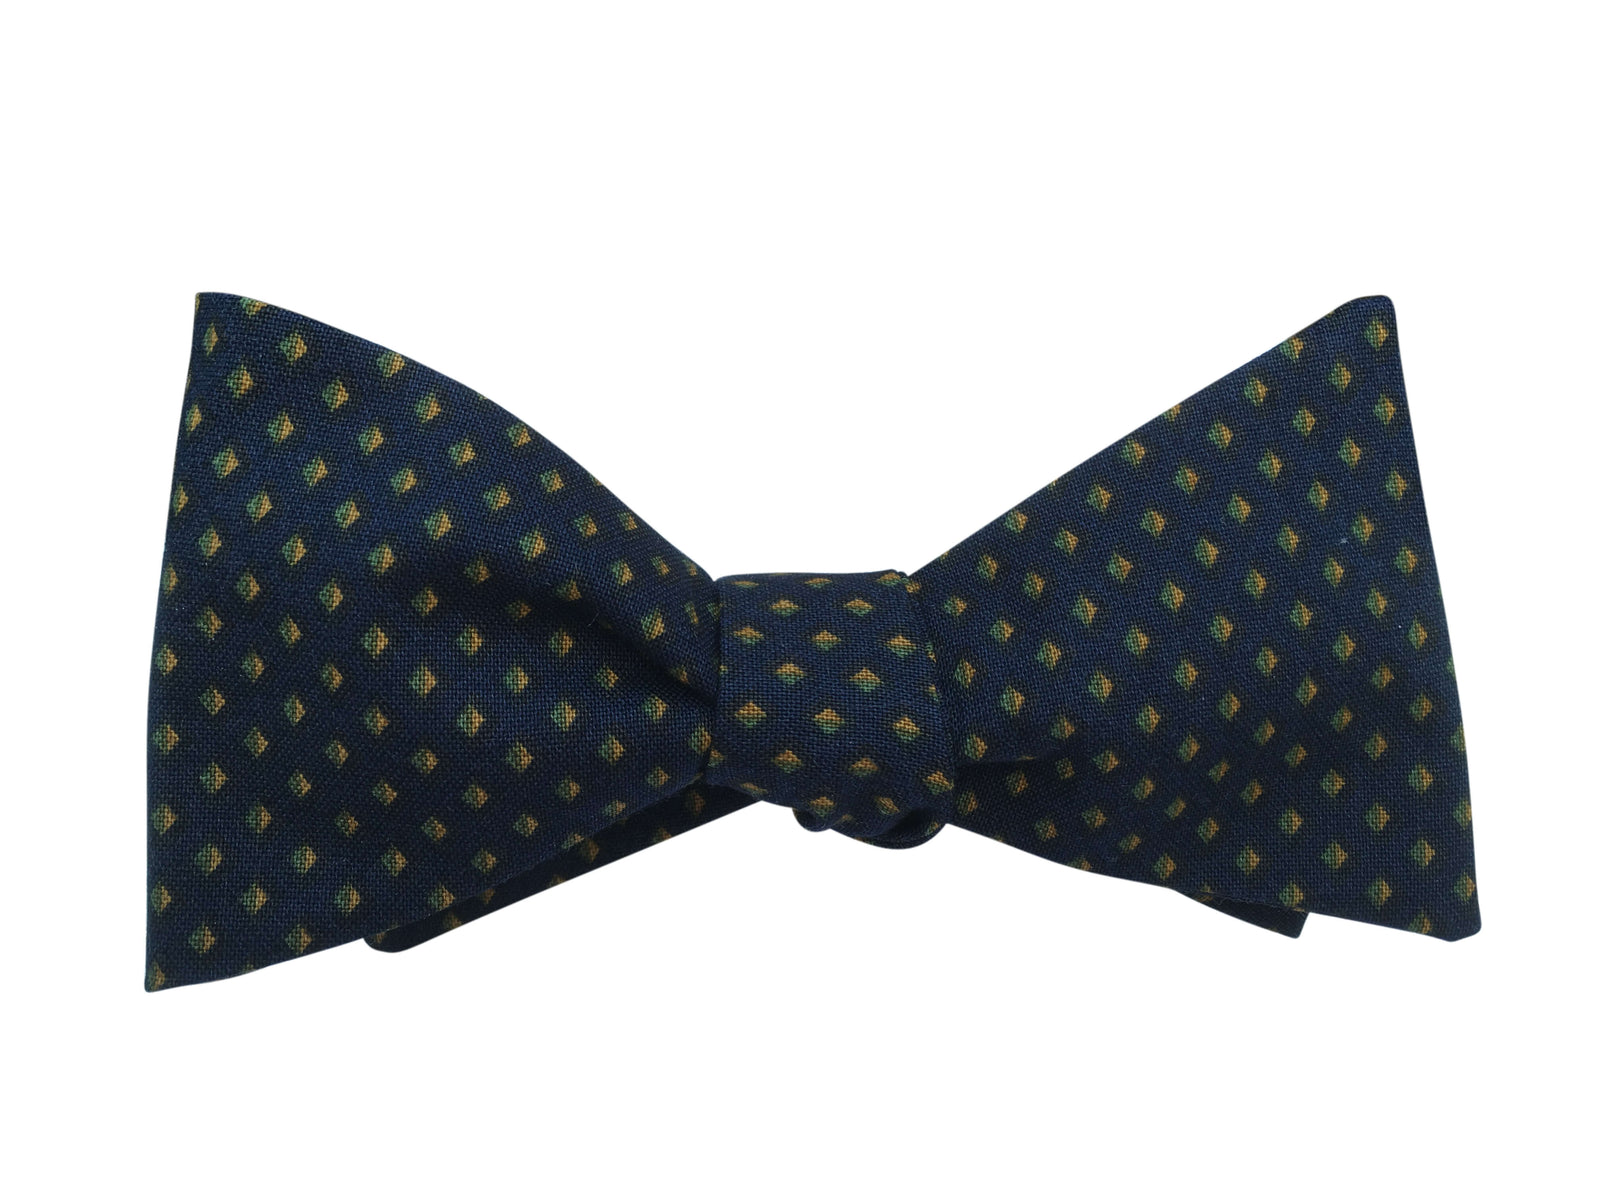 Funky Bow Ties - Unique, Limited Edition Handmade Bow Ties